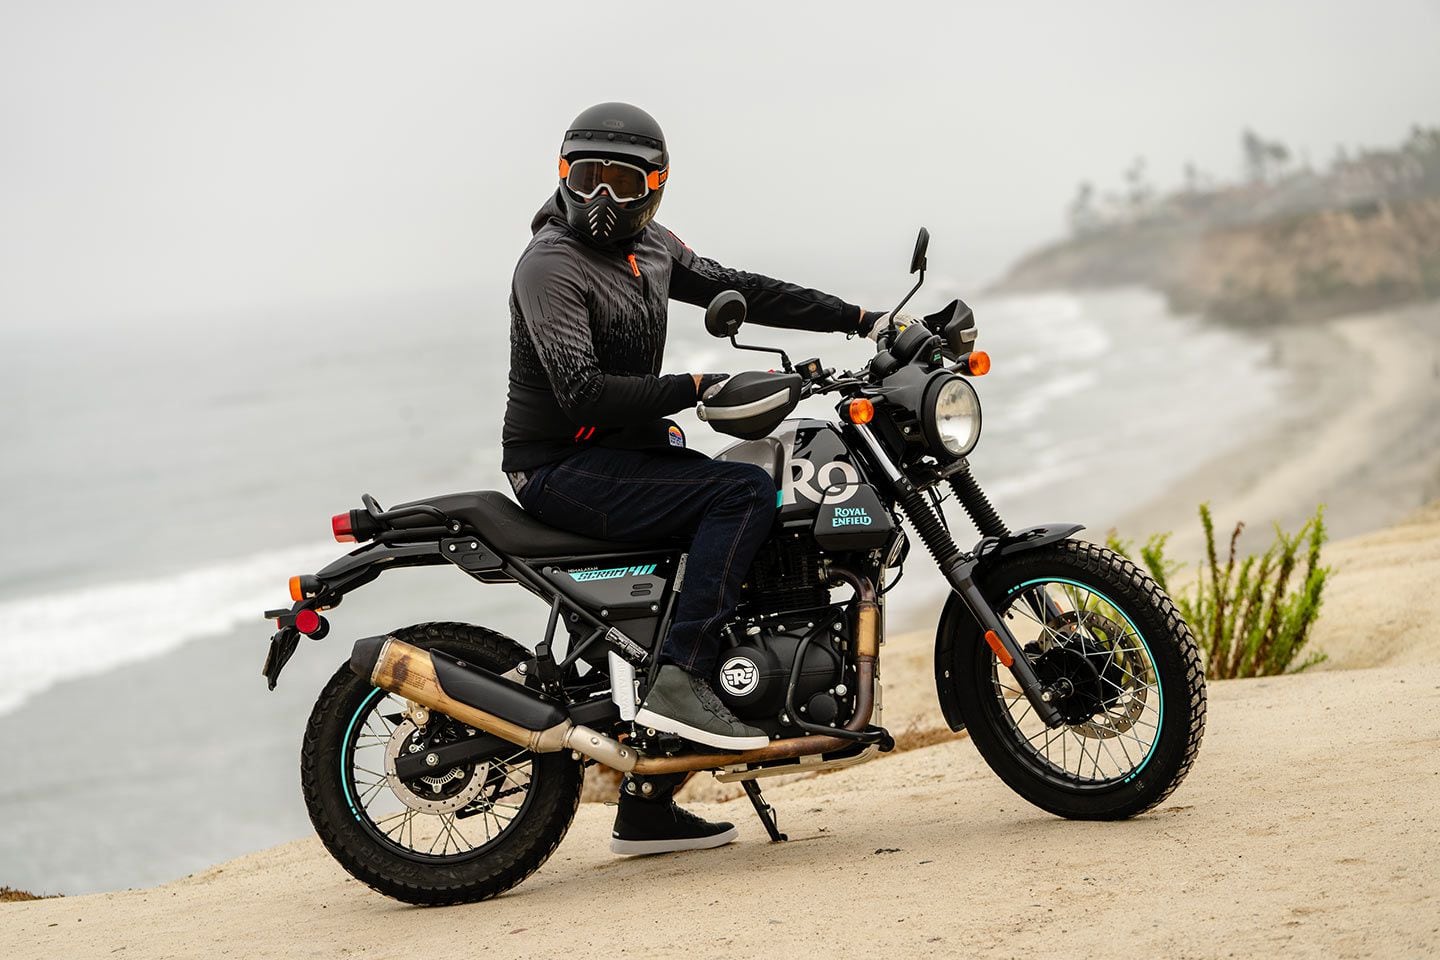 The Scram is a full-sized real motorcycle that is a good fit for first-time riders or more seasoned motorcyclists seeking a second bike for quick urban rides.